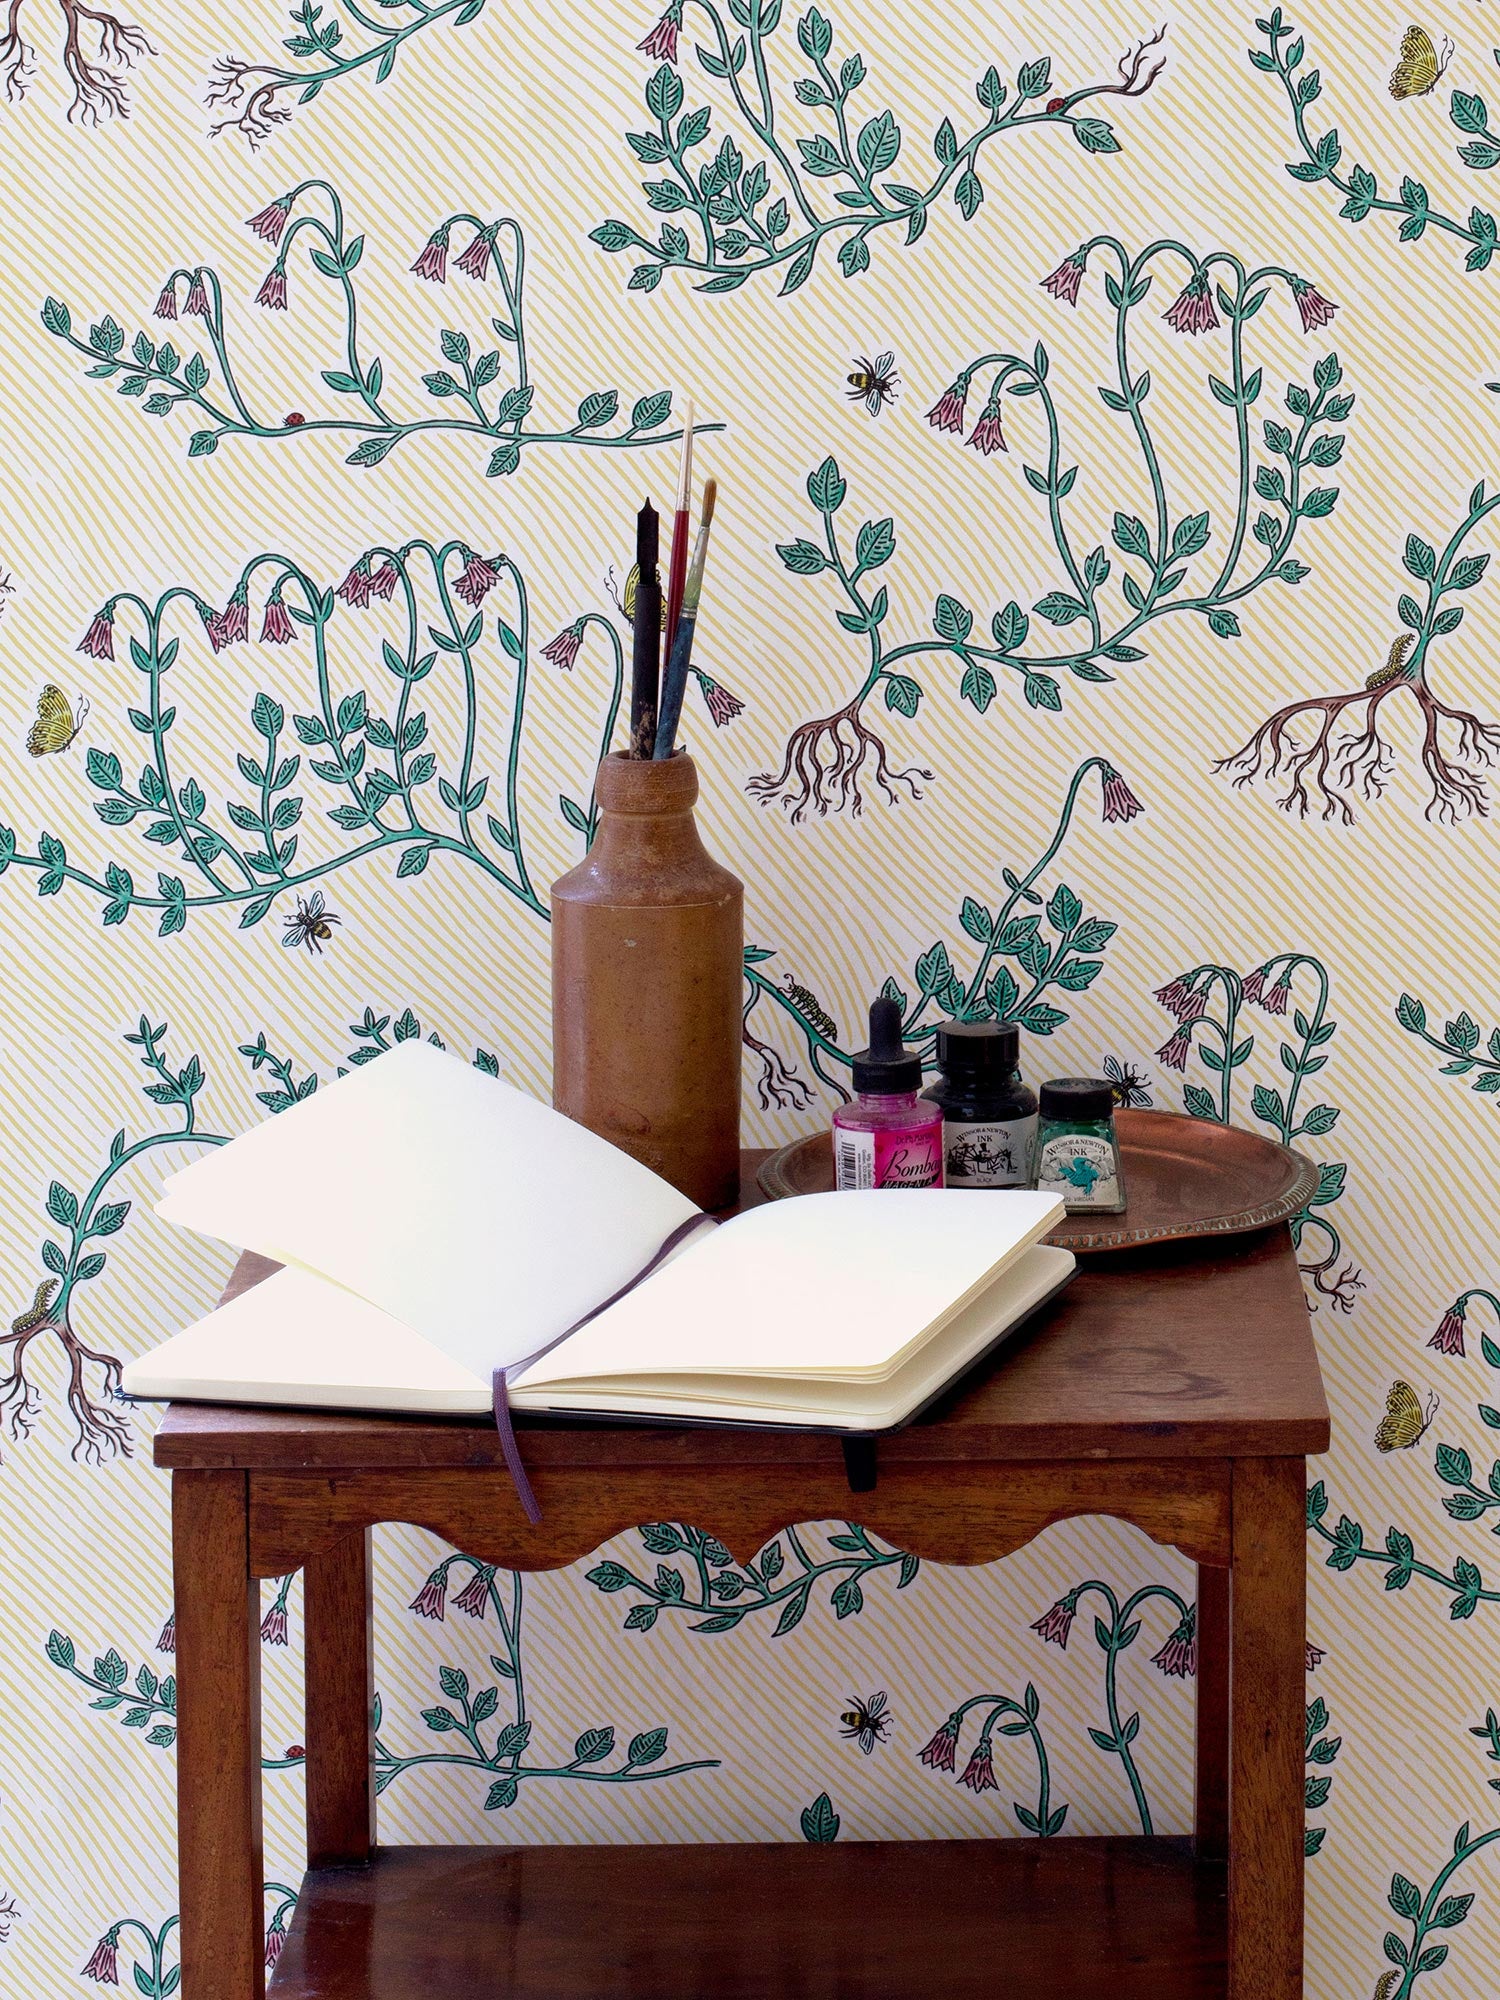 Floral wallpaper on yellow striped background, illustrated by artist Fee Greening, featuring green stems, pink flowers, butterflies and bees, pictured with wooden table with art materials